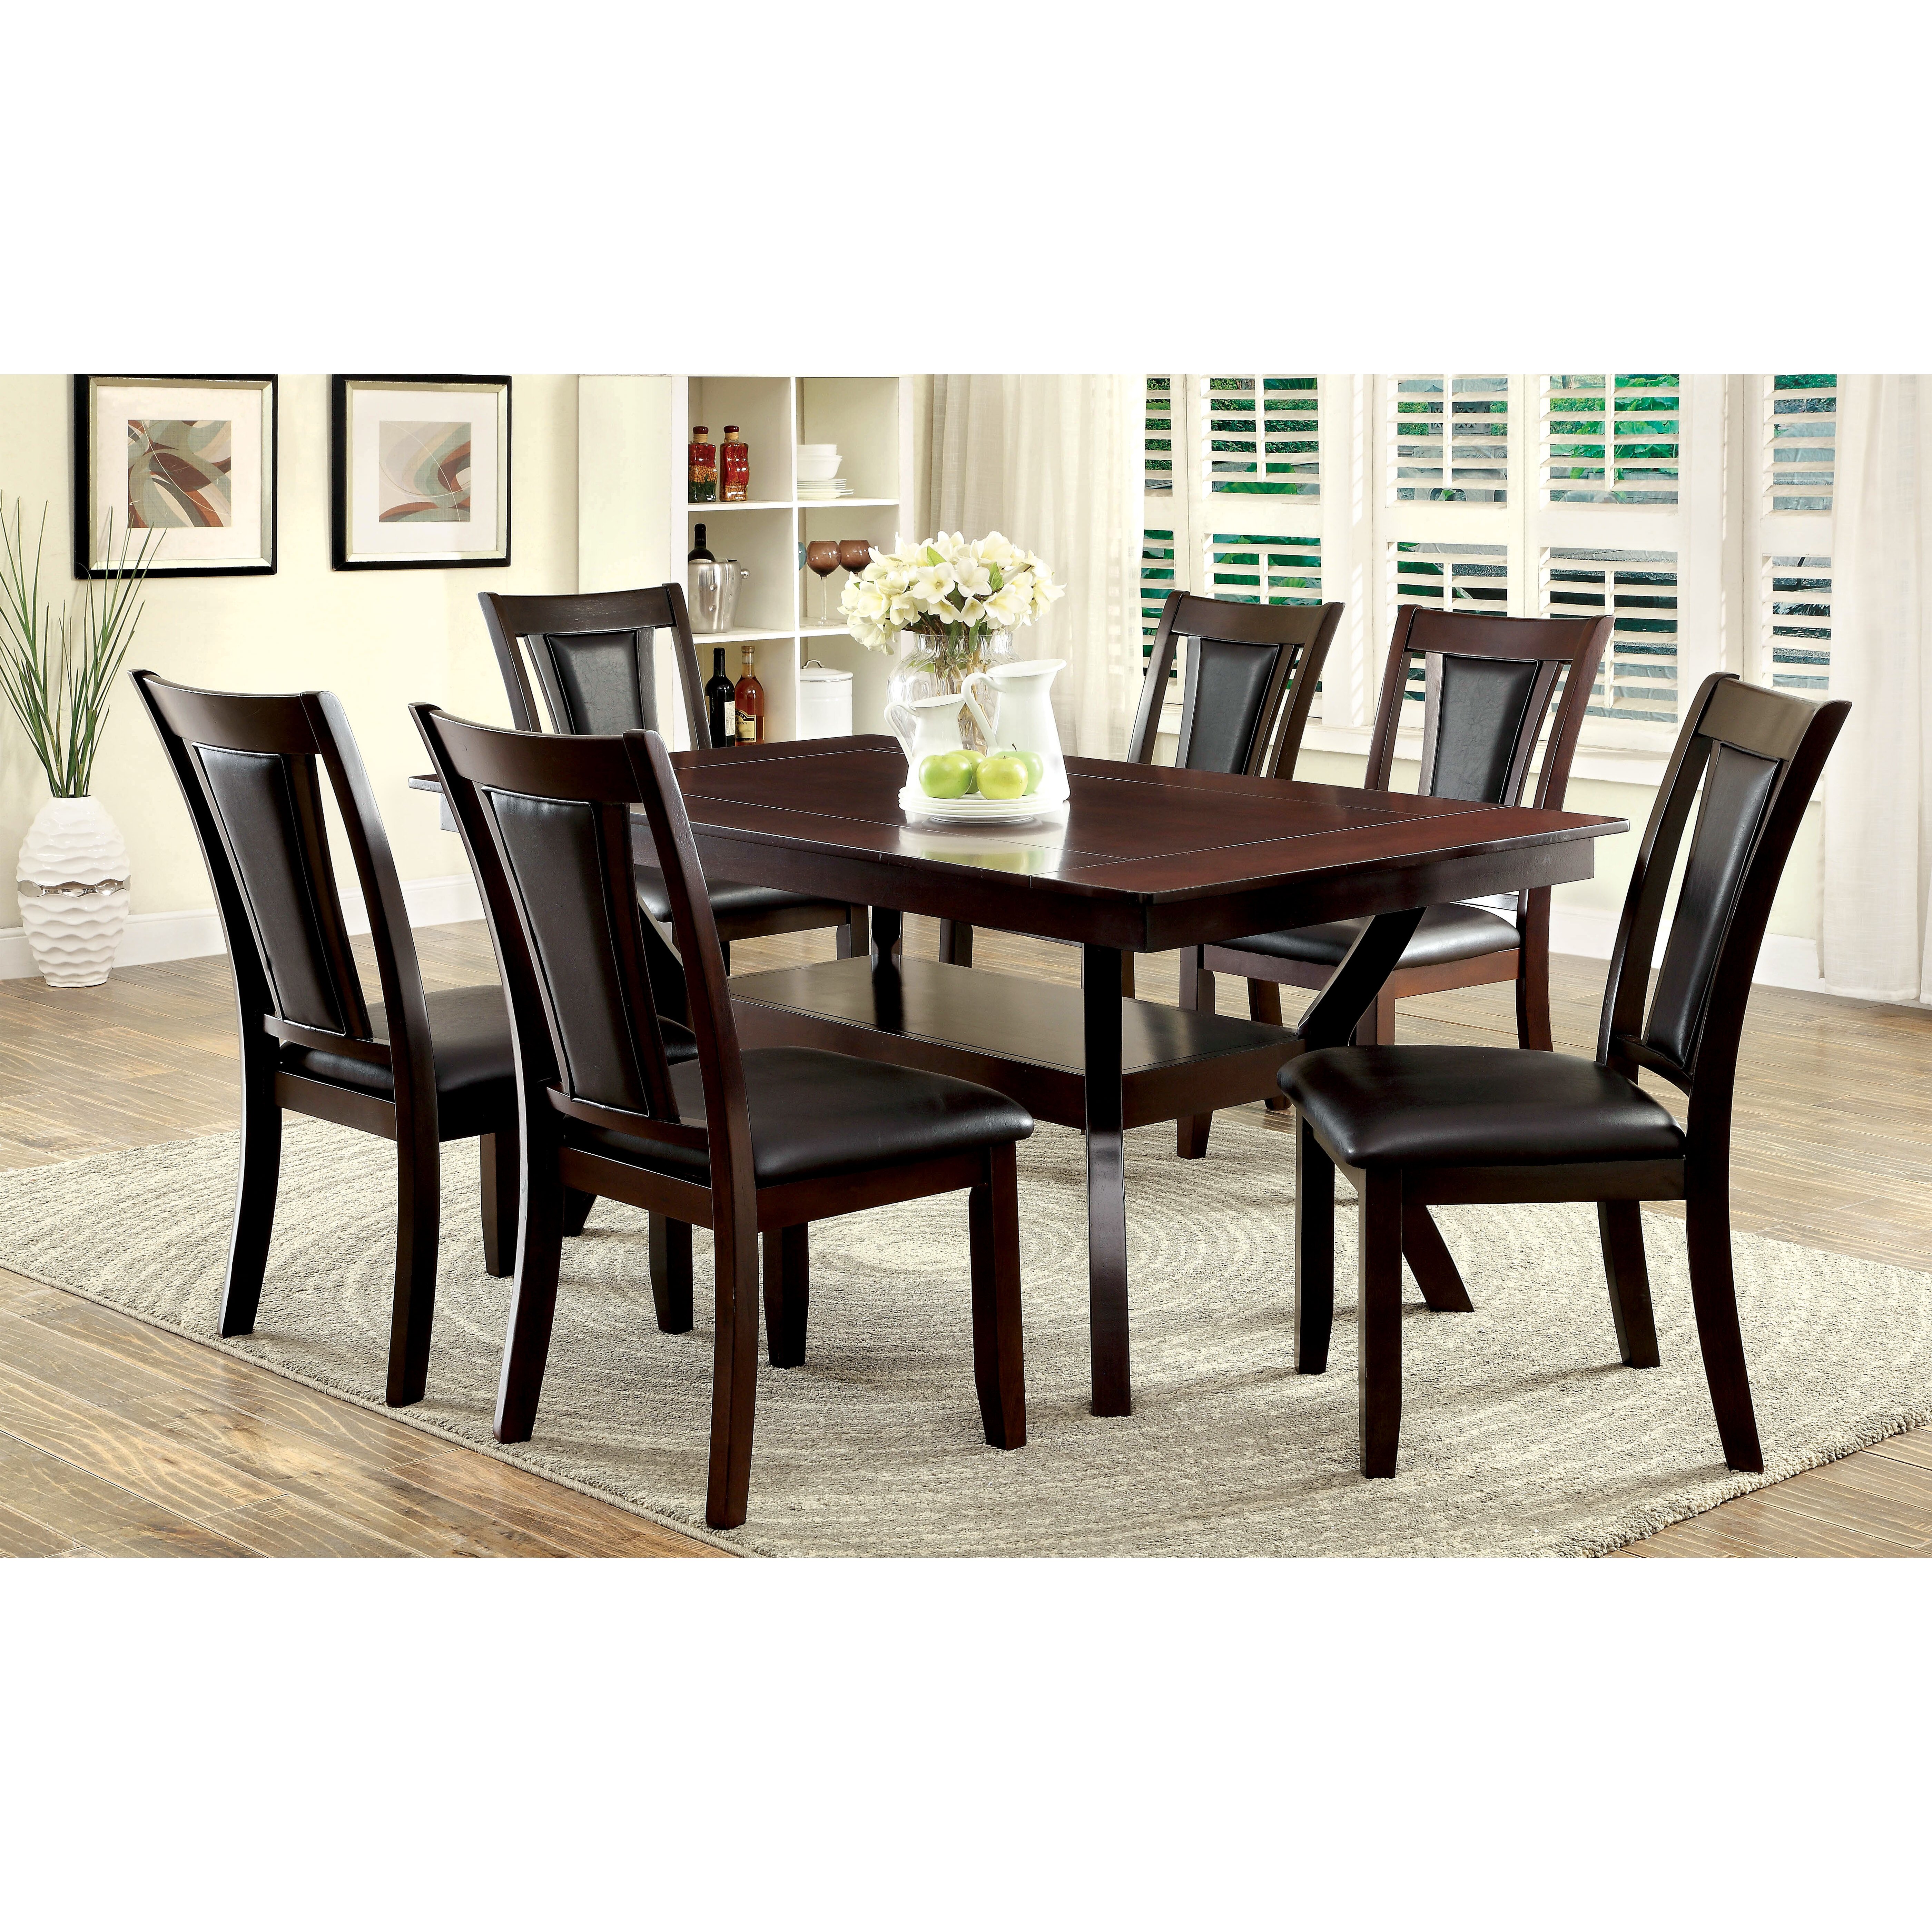 Ferraro 7 Piece Dining Set by Darby Home Co